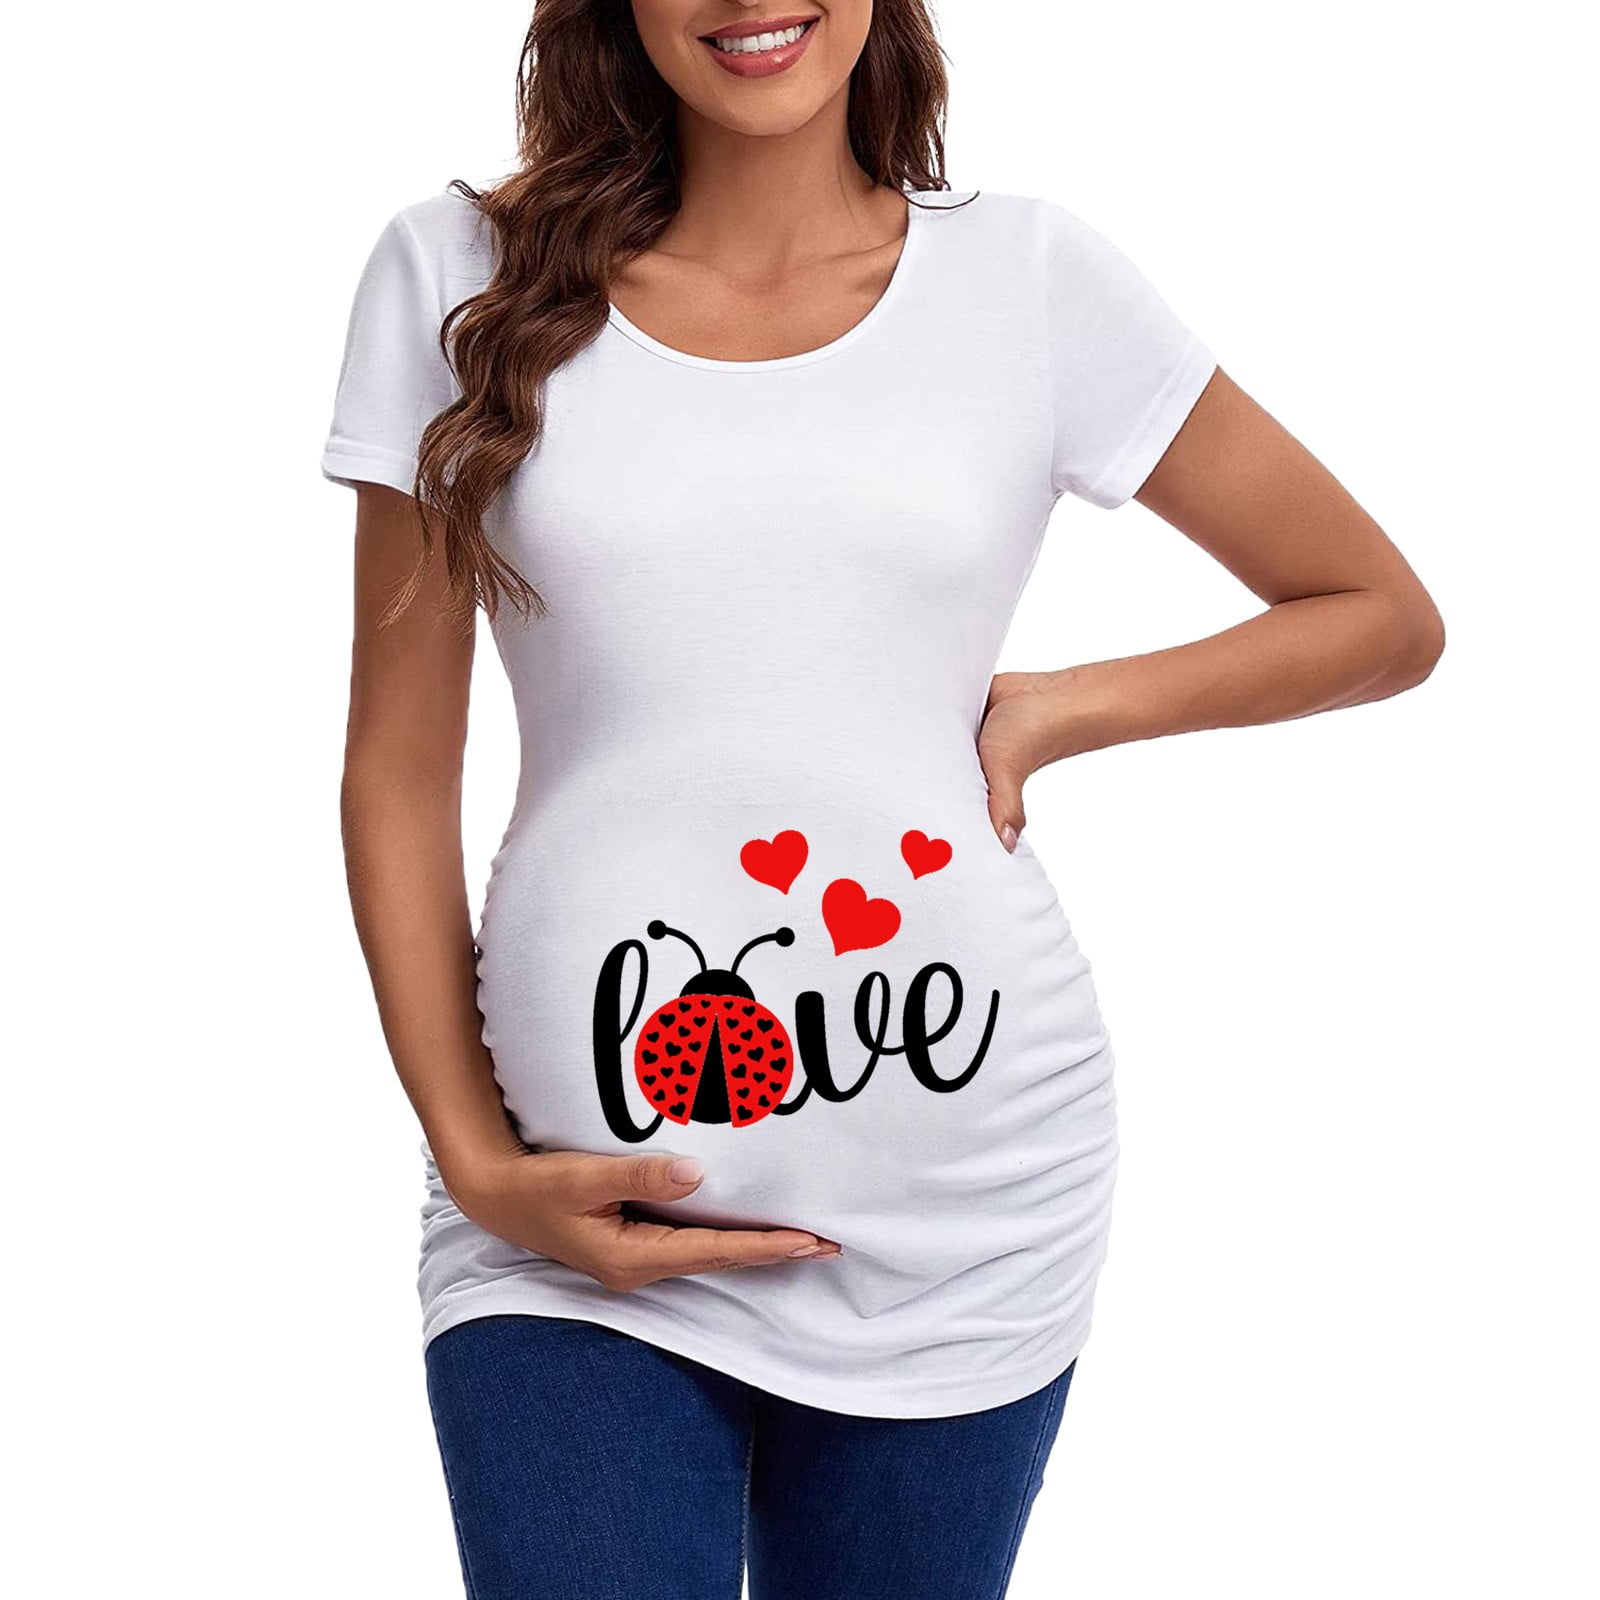 WAJCSHFS Maternity Summer Clothes Plus Size Women's Maternity Shirt Side  Ruched Tunic Pregnancy Top Clothes (White,L) 